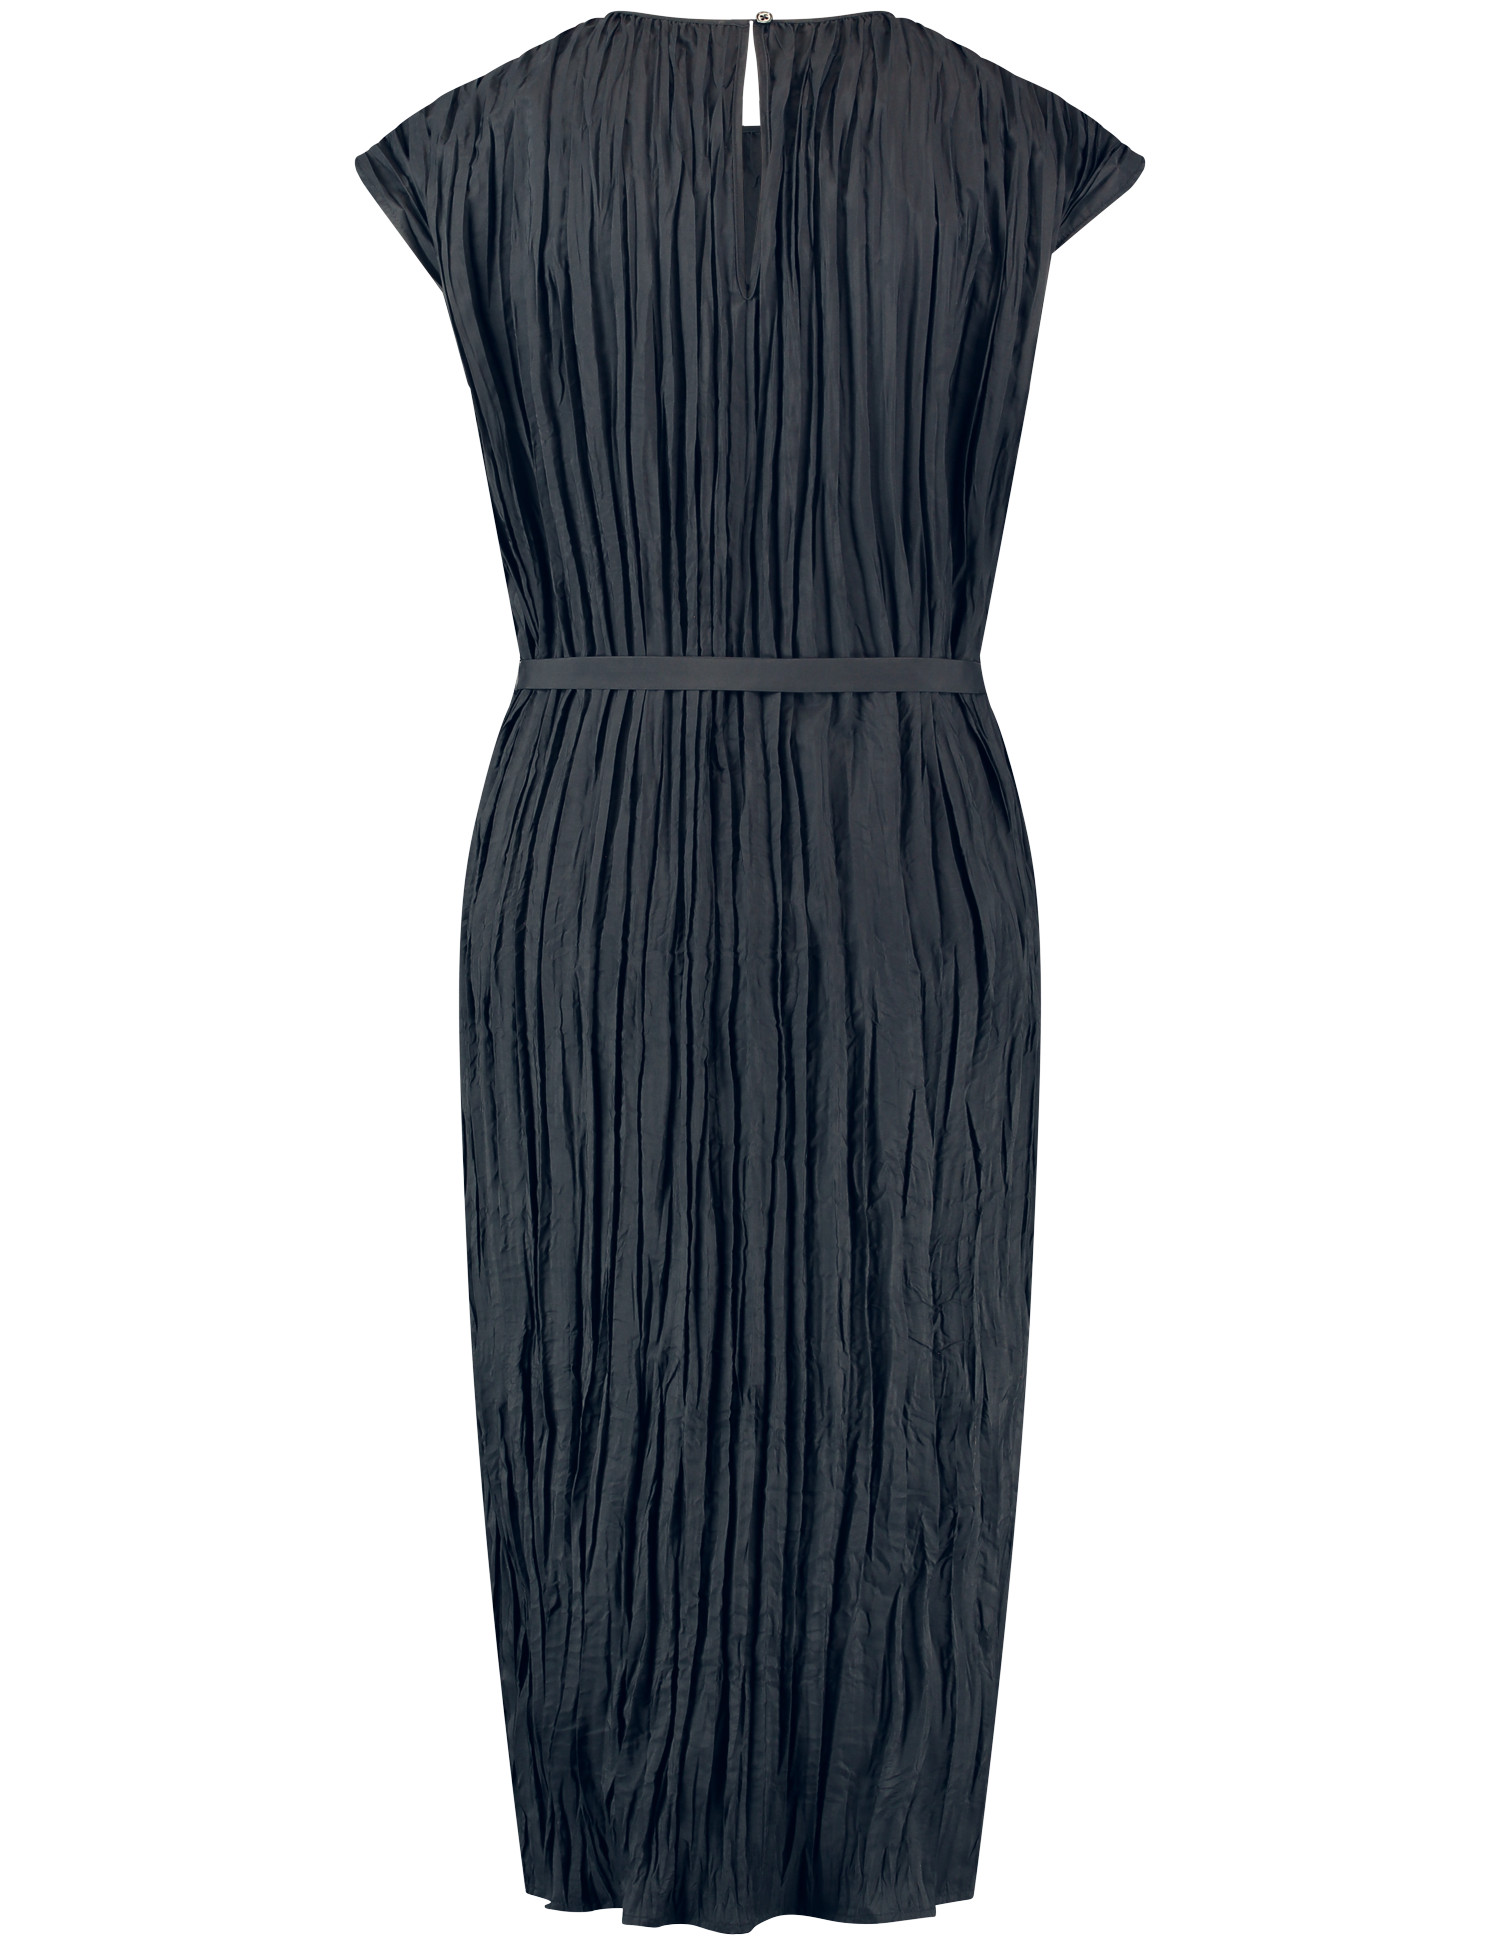 GERRY WEBER BLACK CRACKLE FABRIC DRESS | Rosella - Style inspired by ...